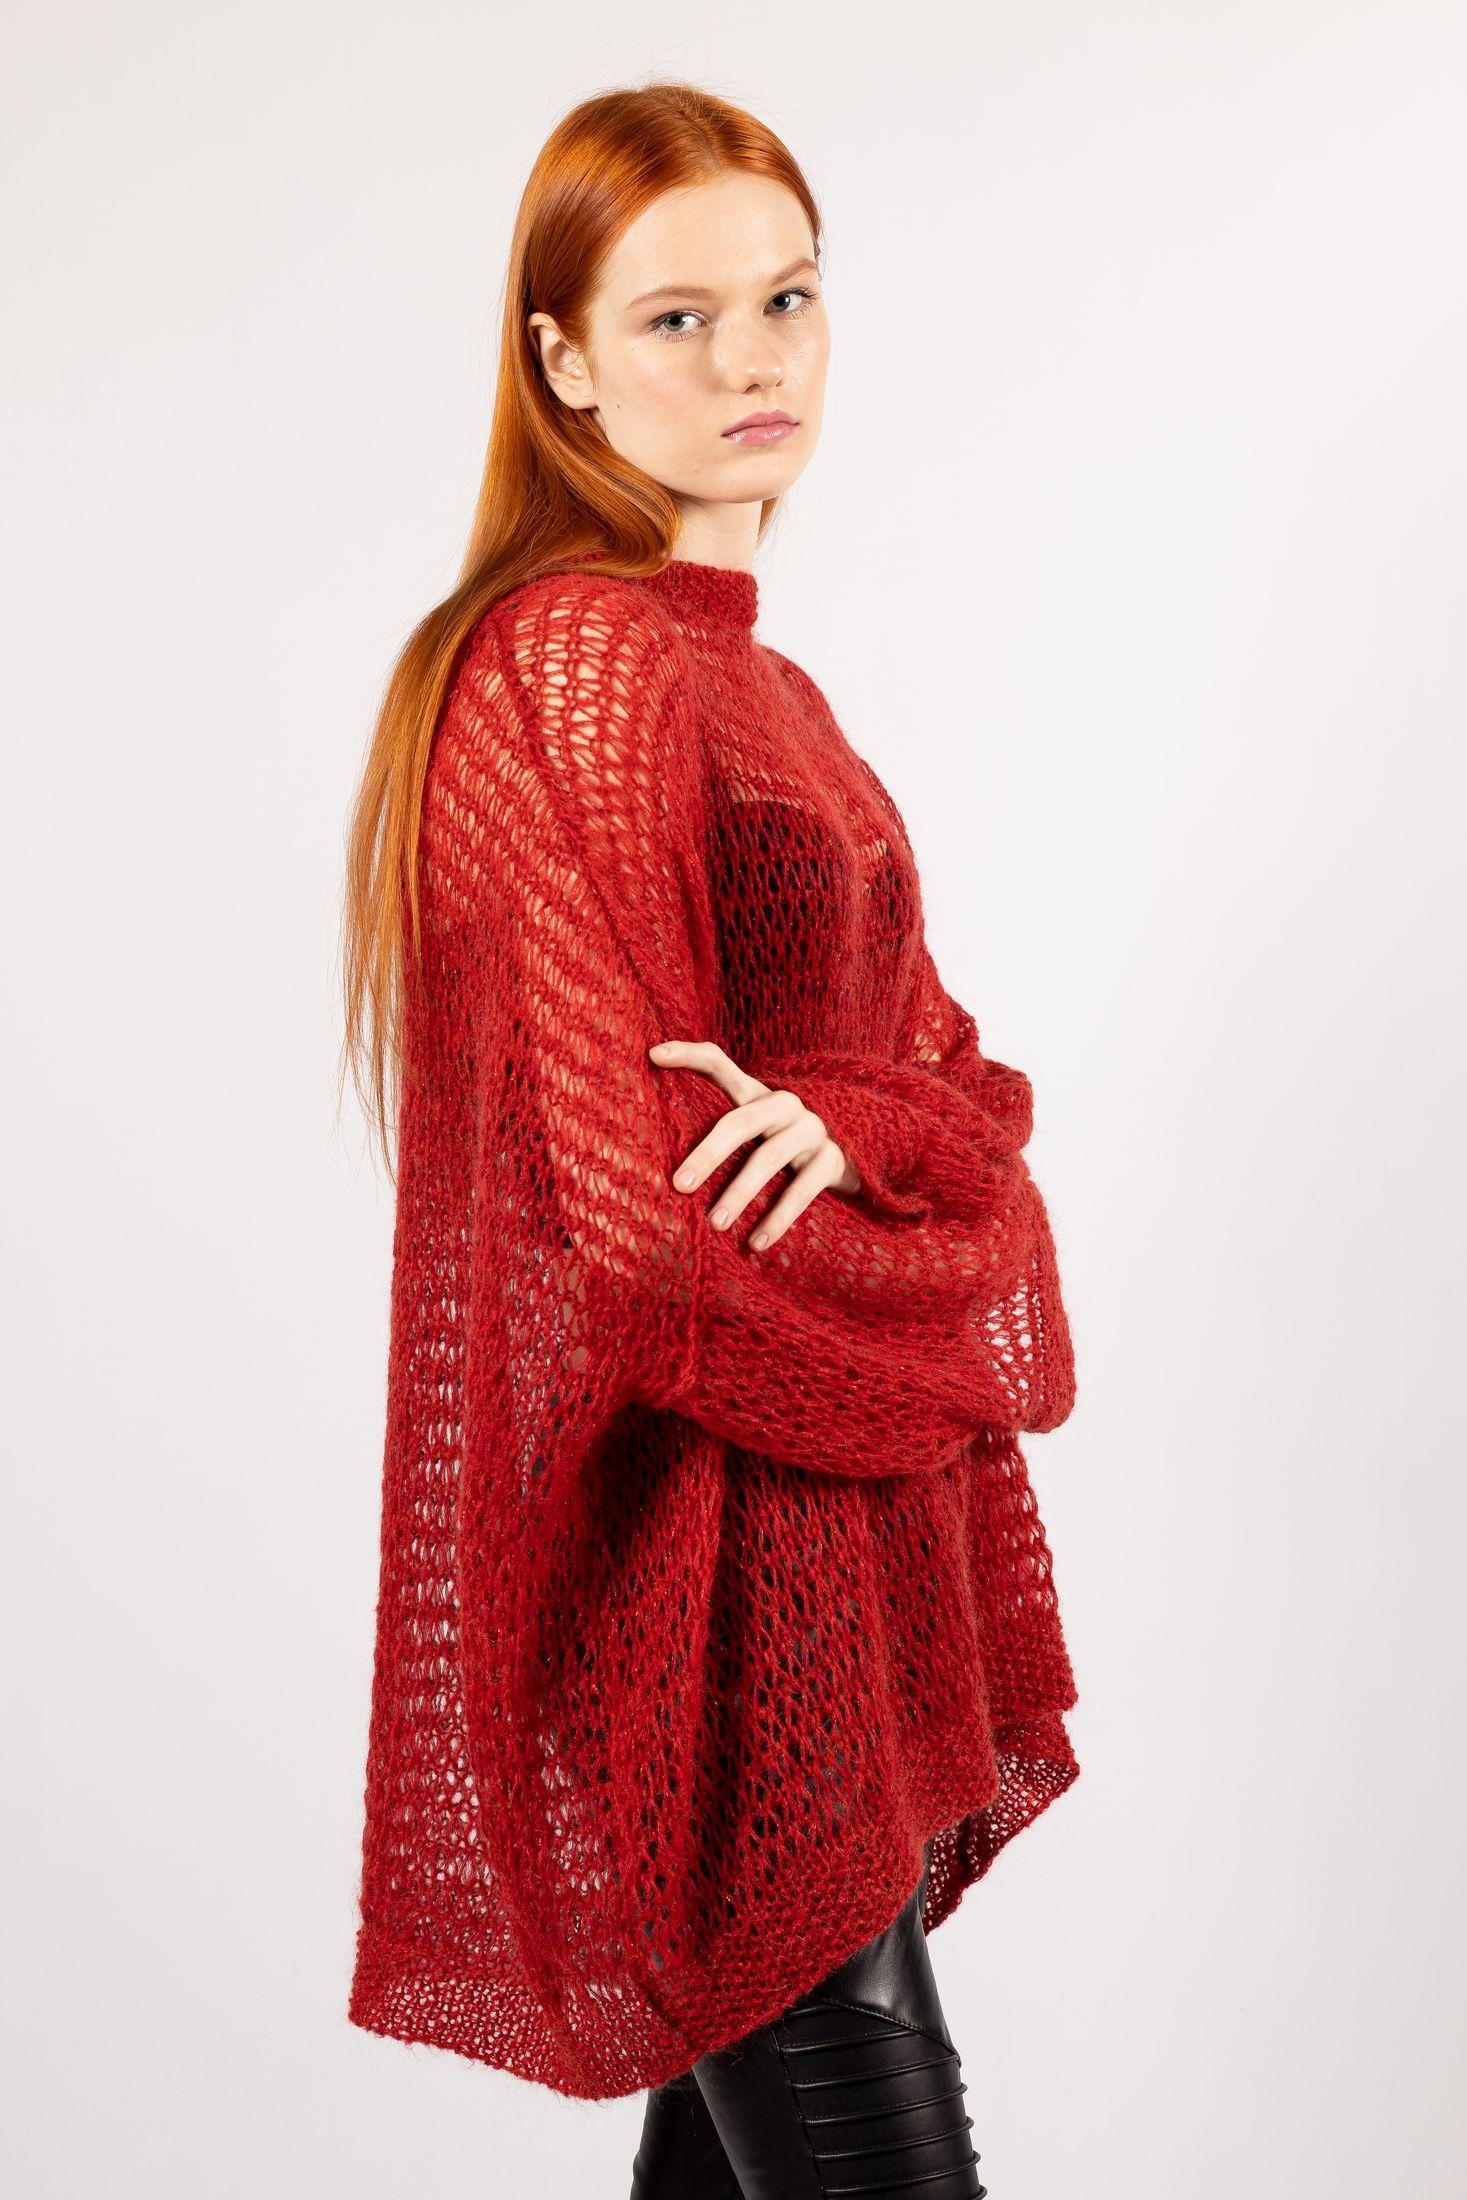 Eye-catching red tunic sweater crafted from soft mohair, showcasing a unique open-loop hand-knit pattern – IDA fashion